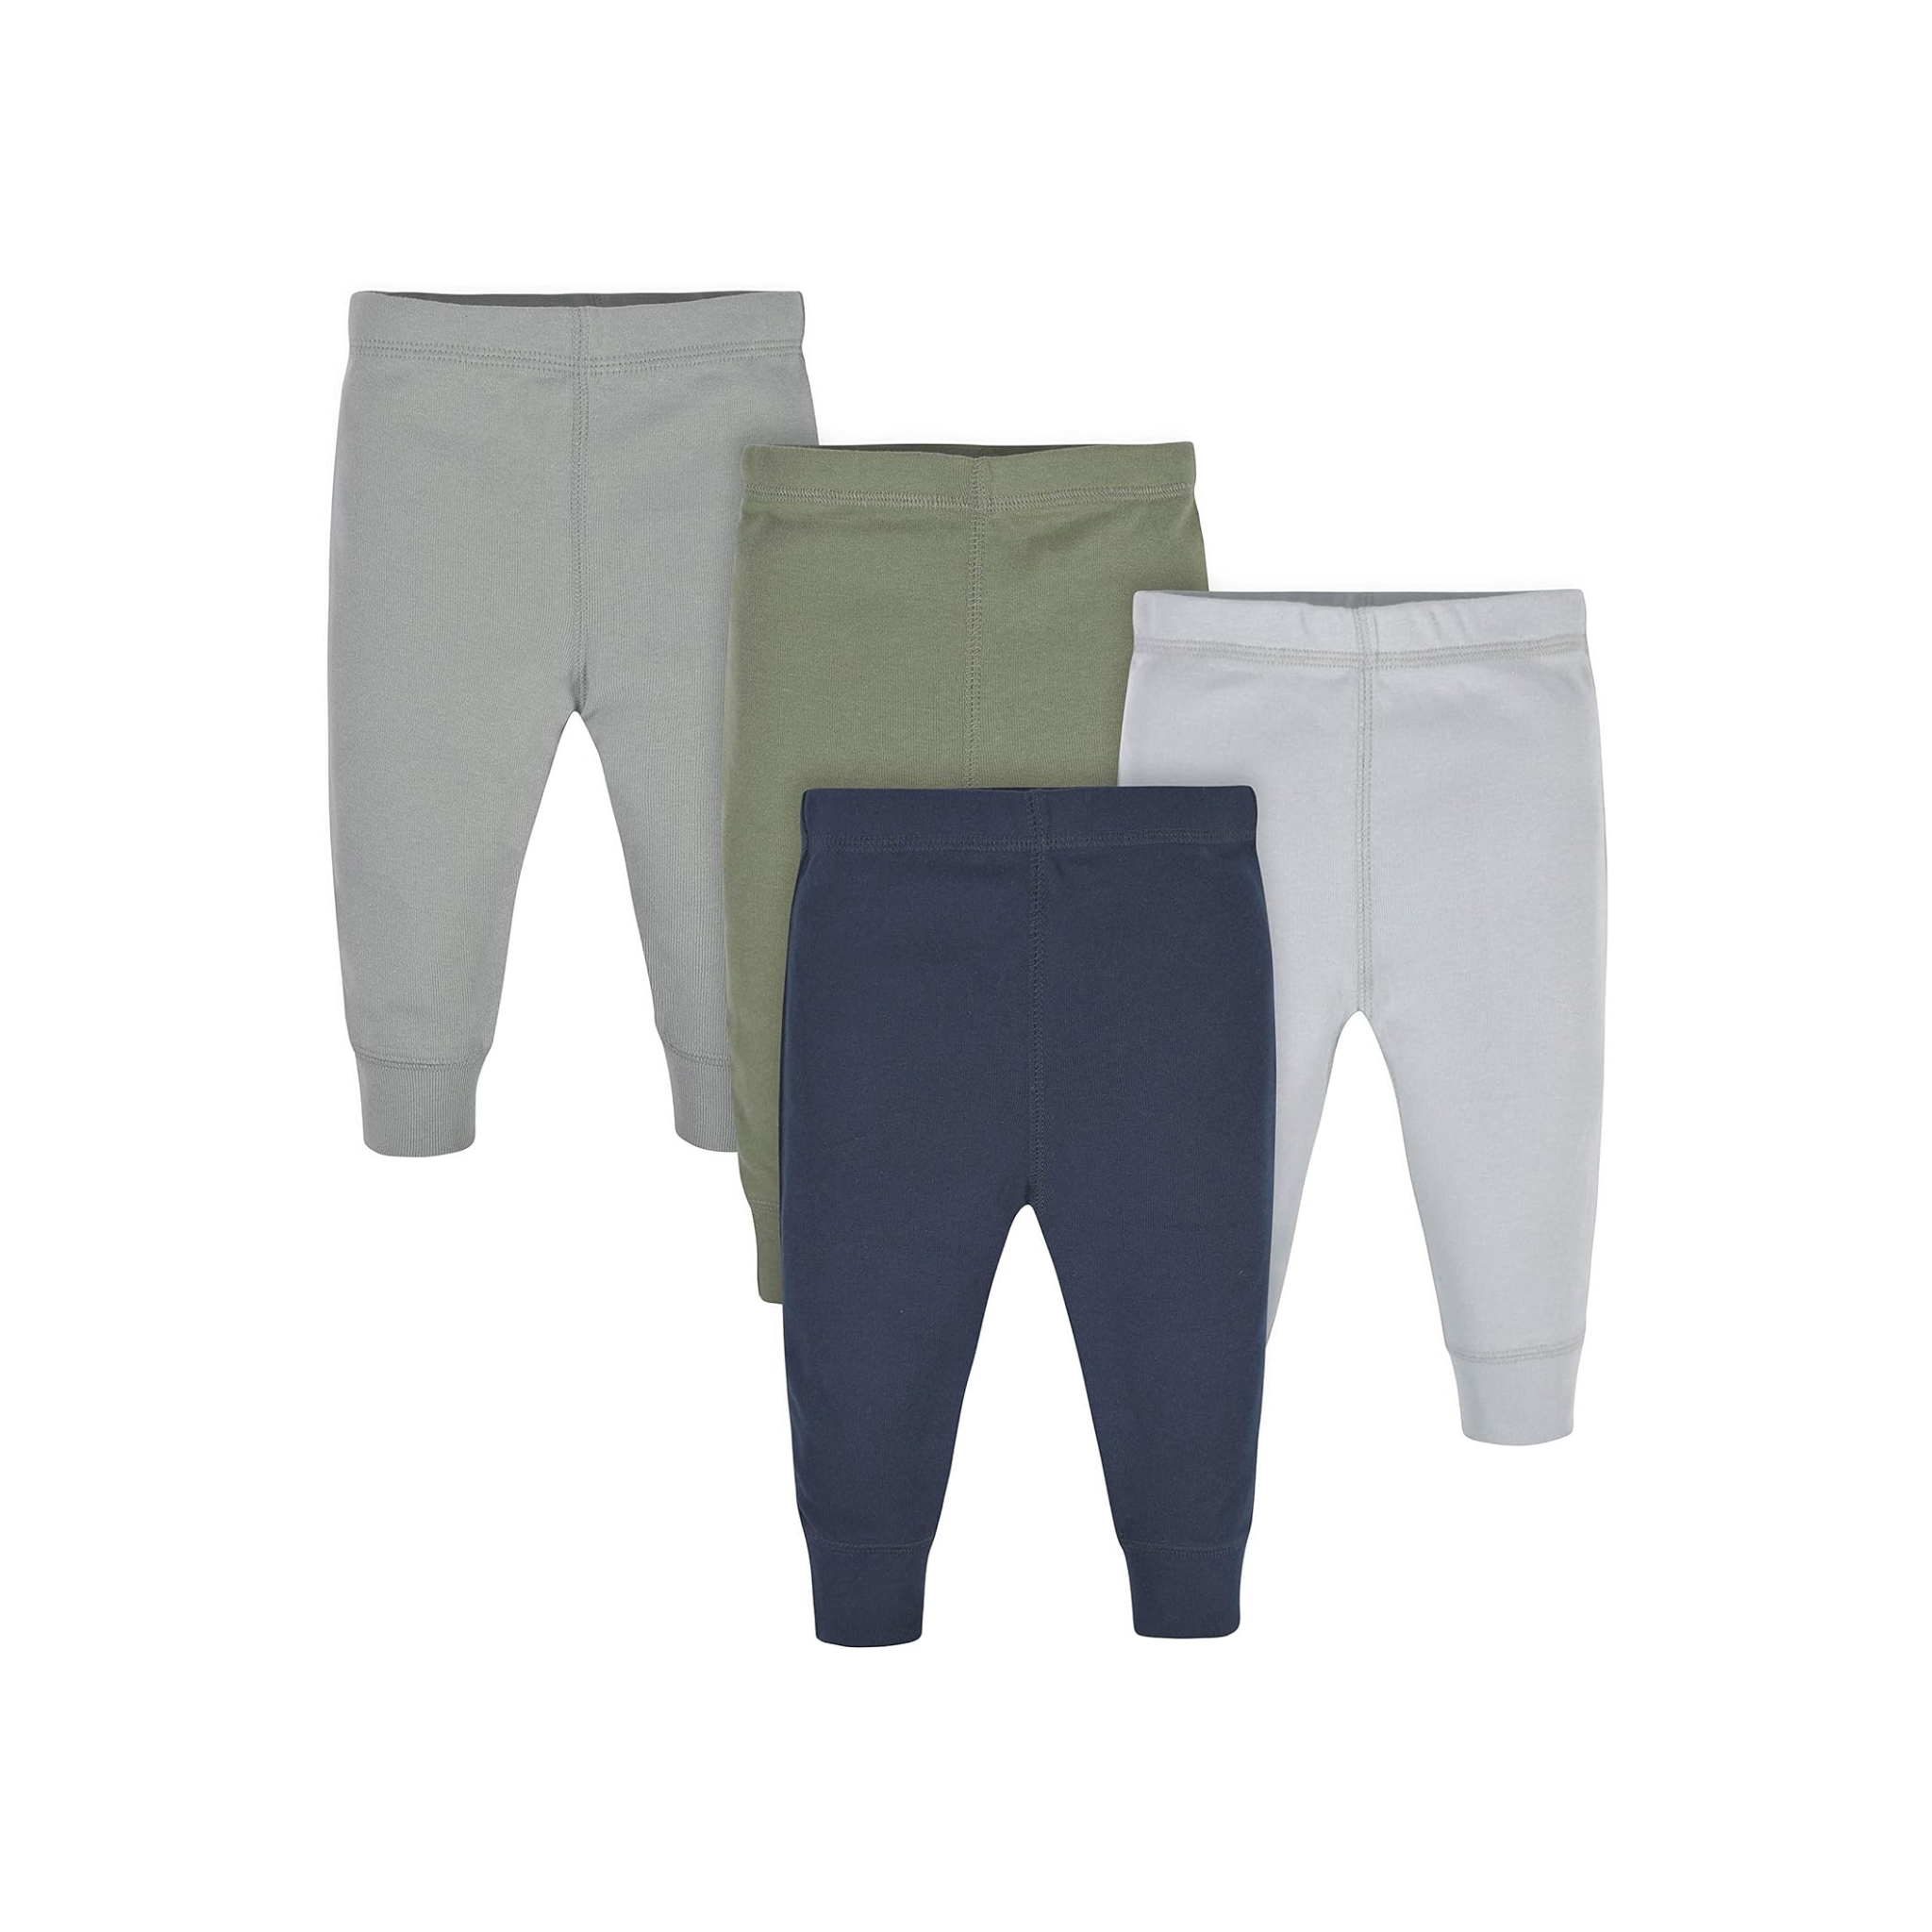 4-Pack Gerber Baby Boys' Active Pants (Various Colors)